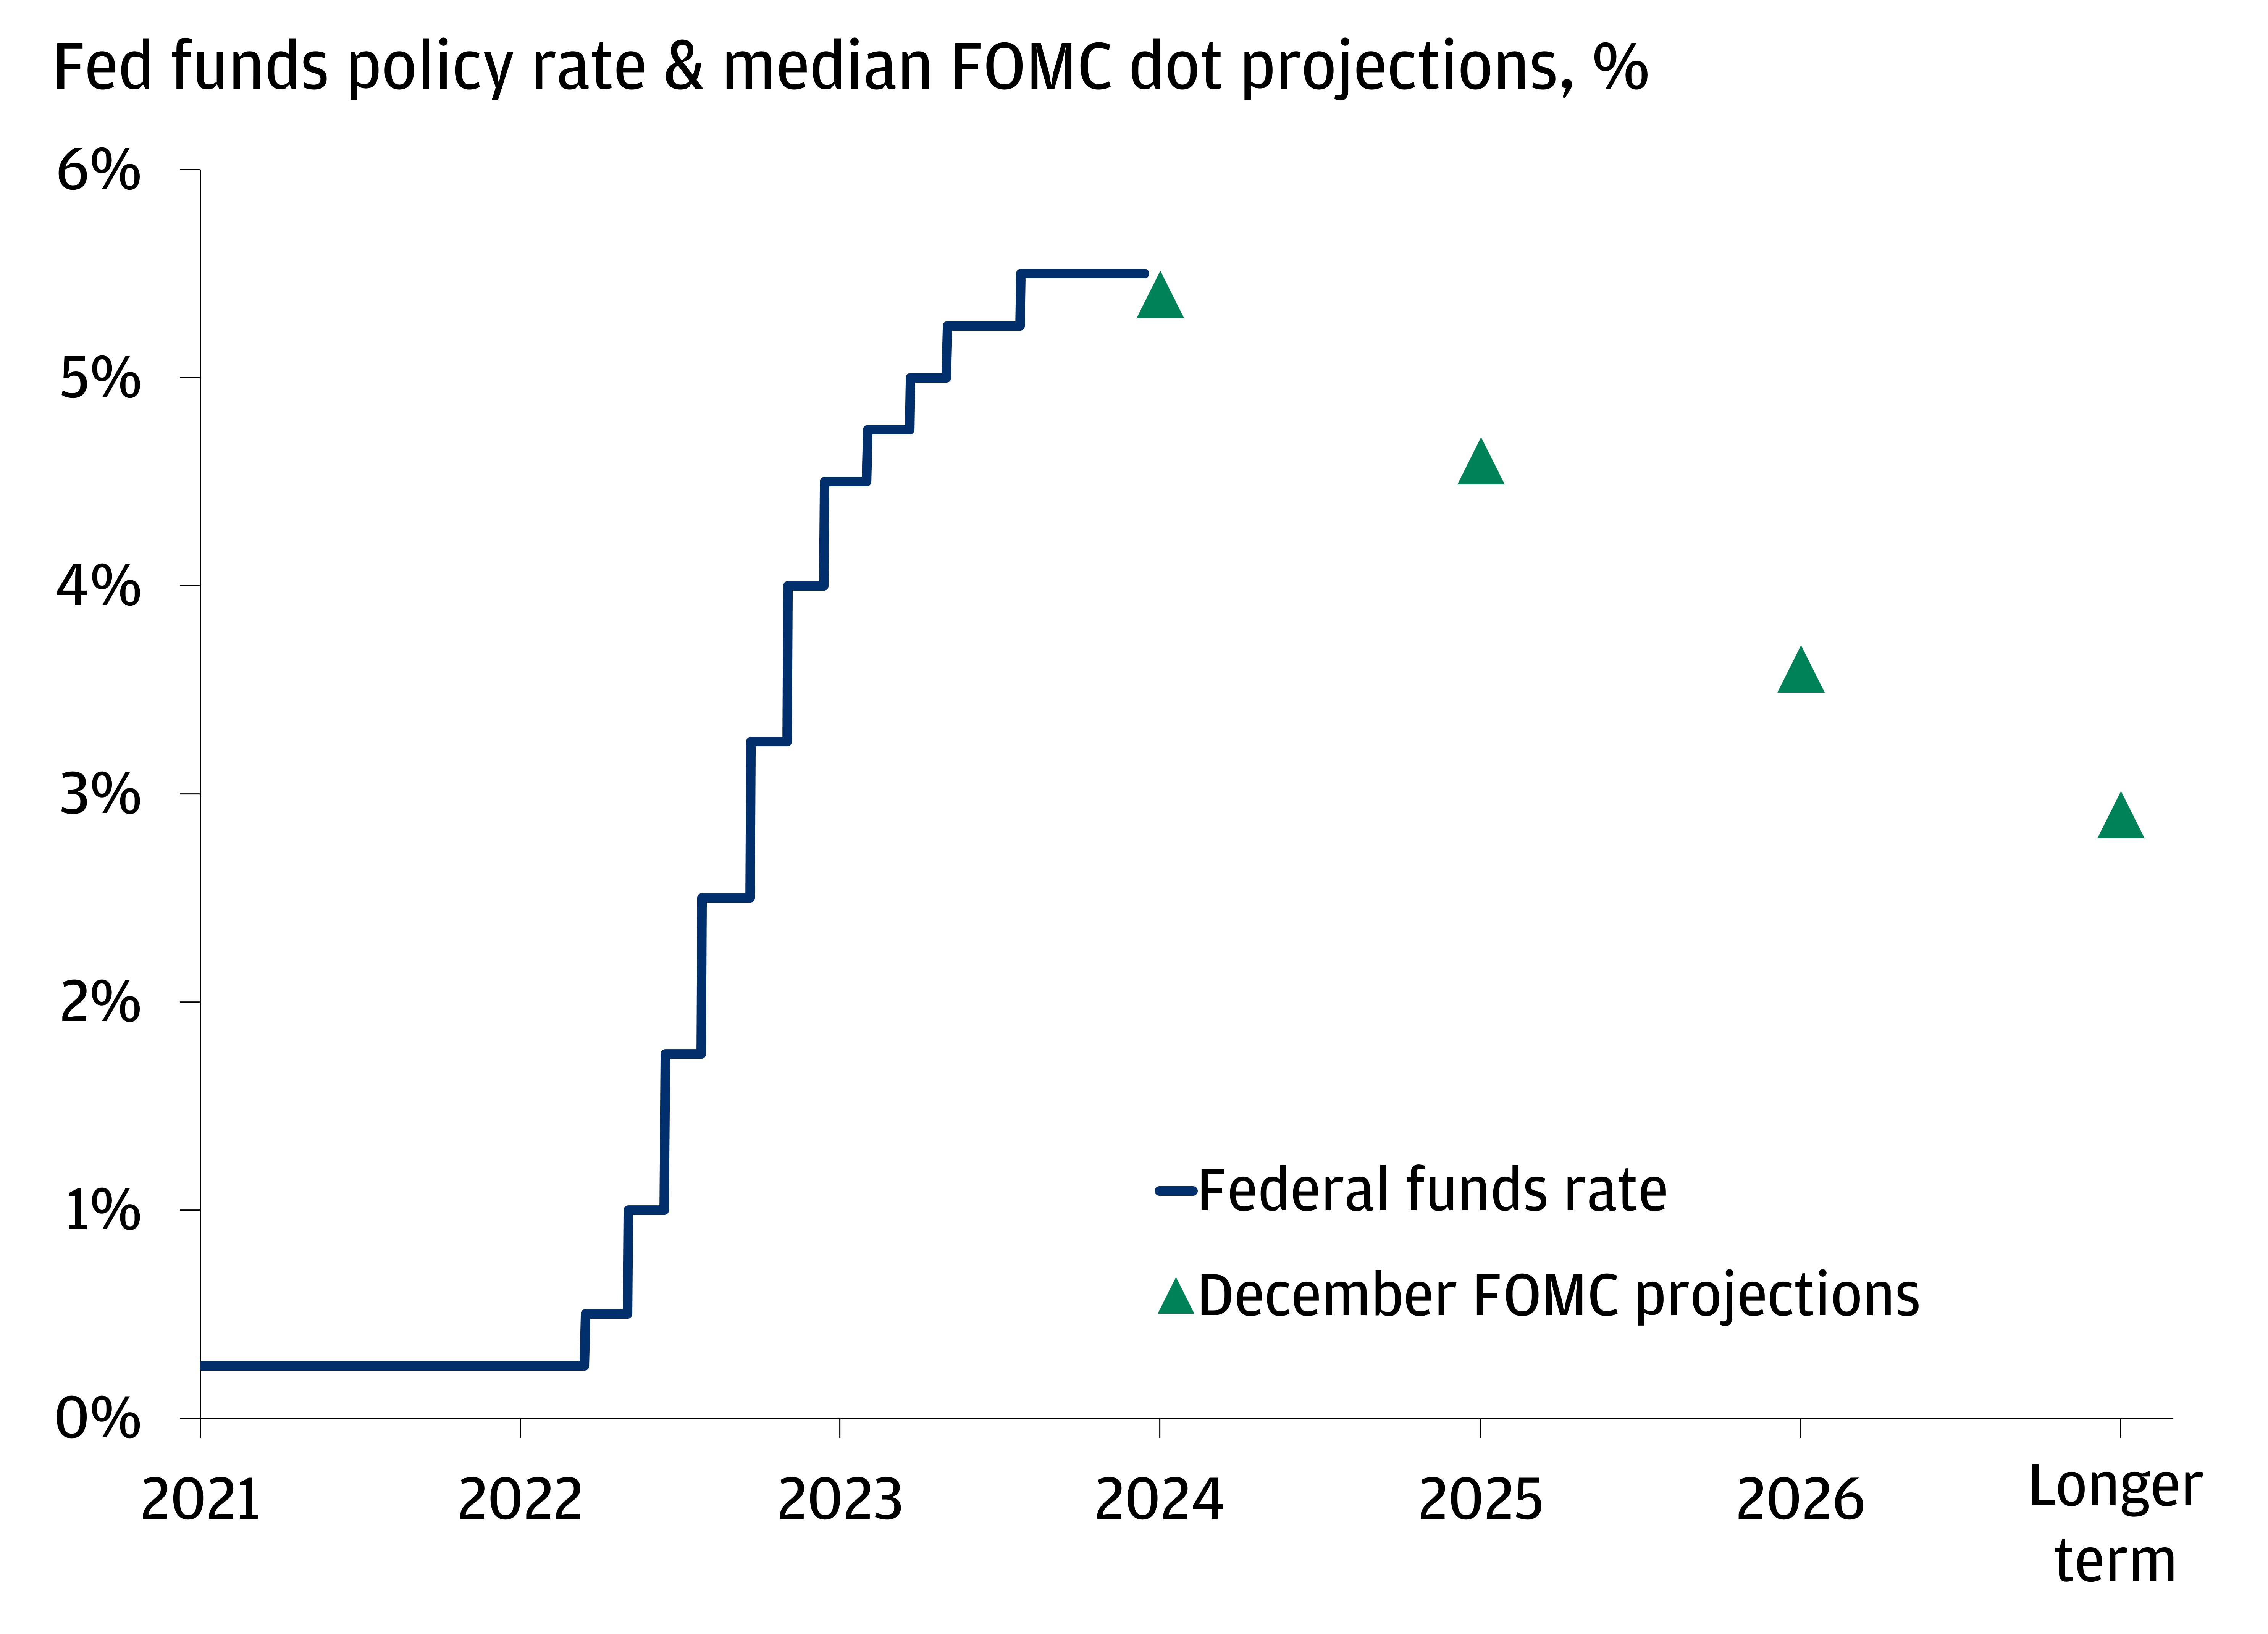 This graph shows the Fed funds policy rate and the median FOMC dot projections since Jan 2021 as of December 14, 2023.